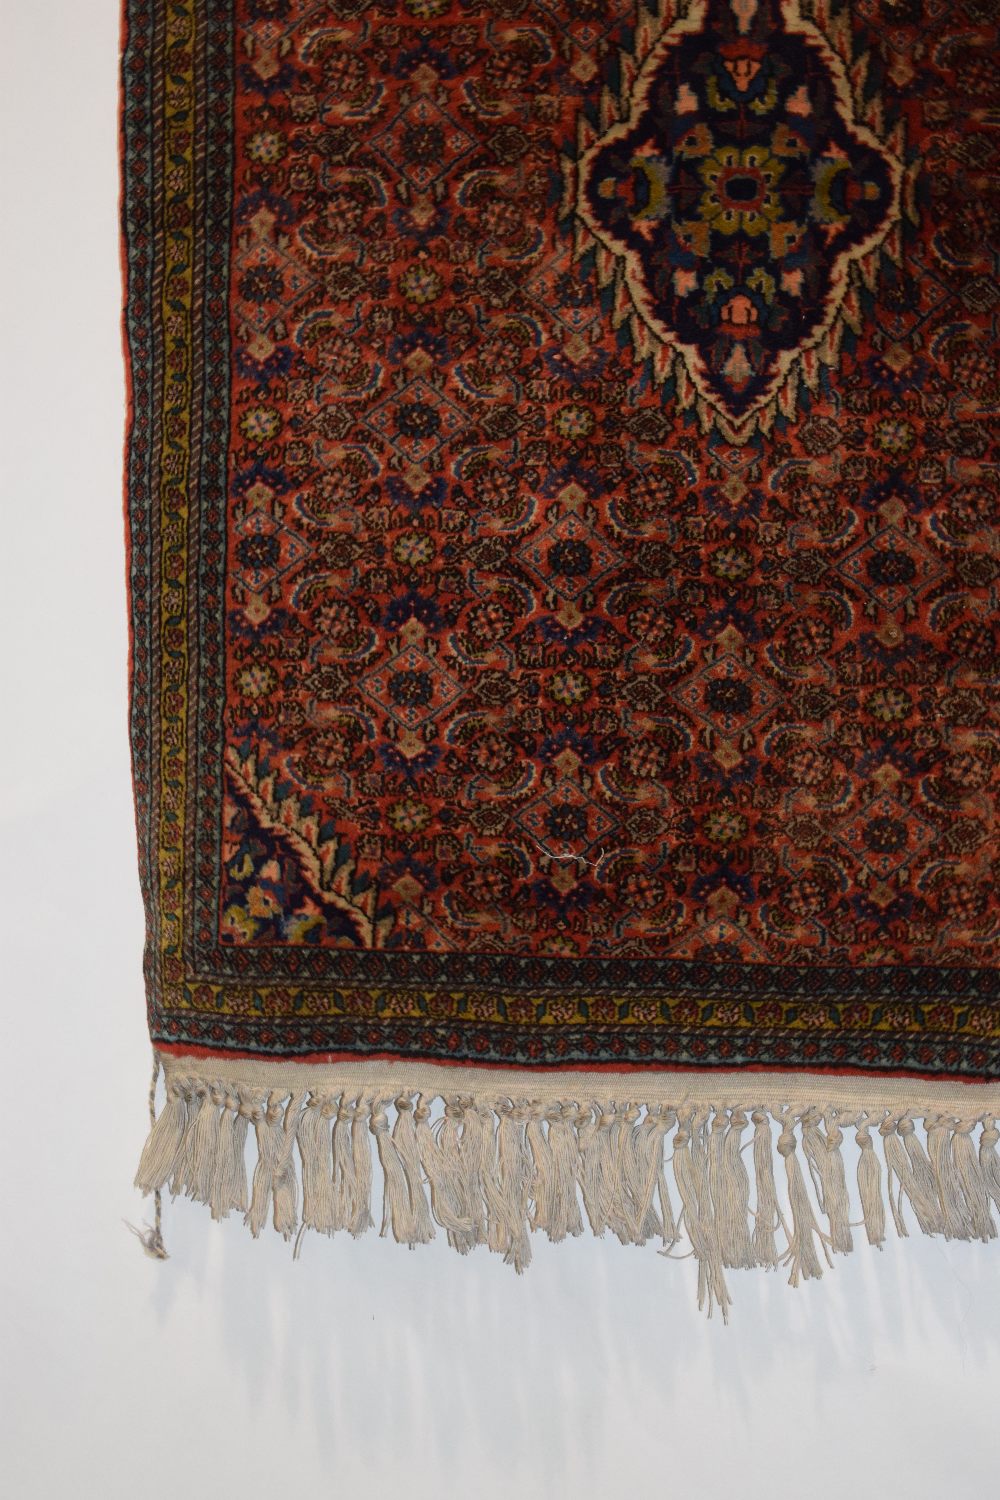 Bijar rug, north west Persia, circa 1950s, 3ft. 3in. X 2ft. 3in. 1m. X 0.69m. Small dark blue centre - Image 5 of 7